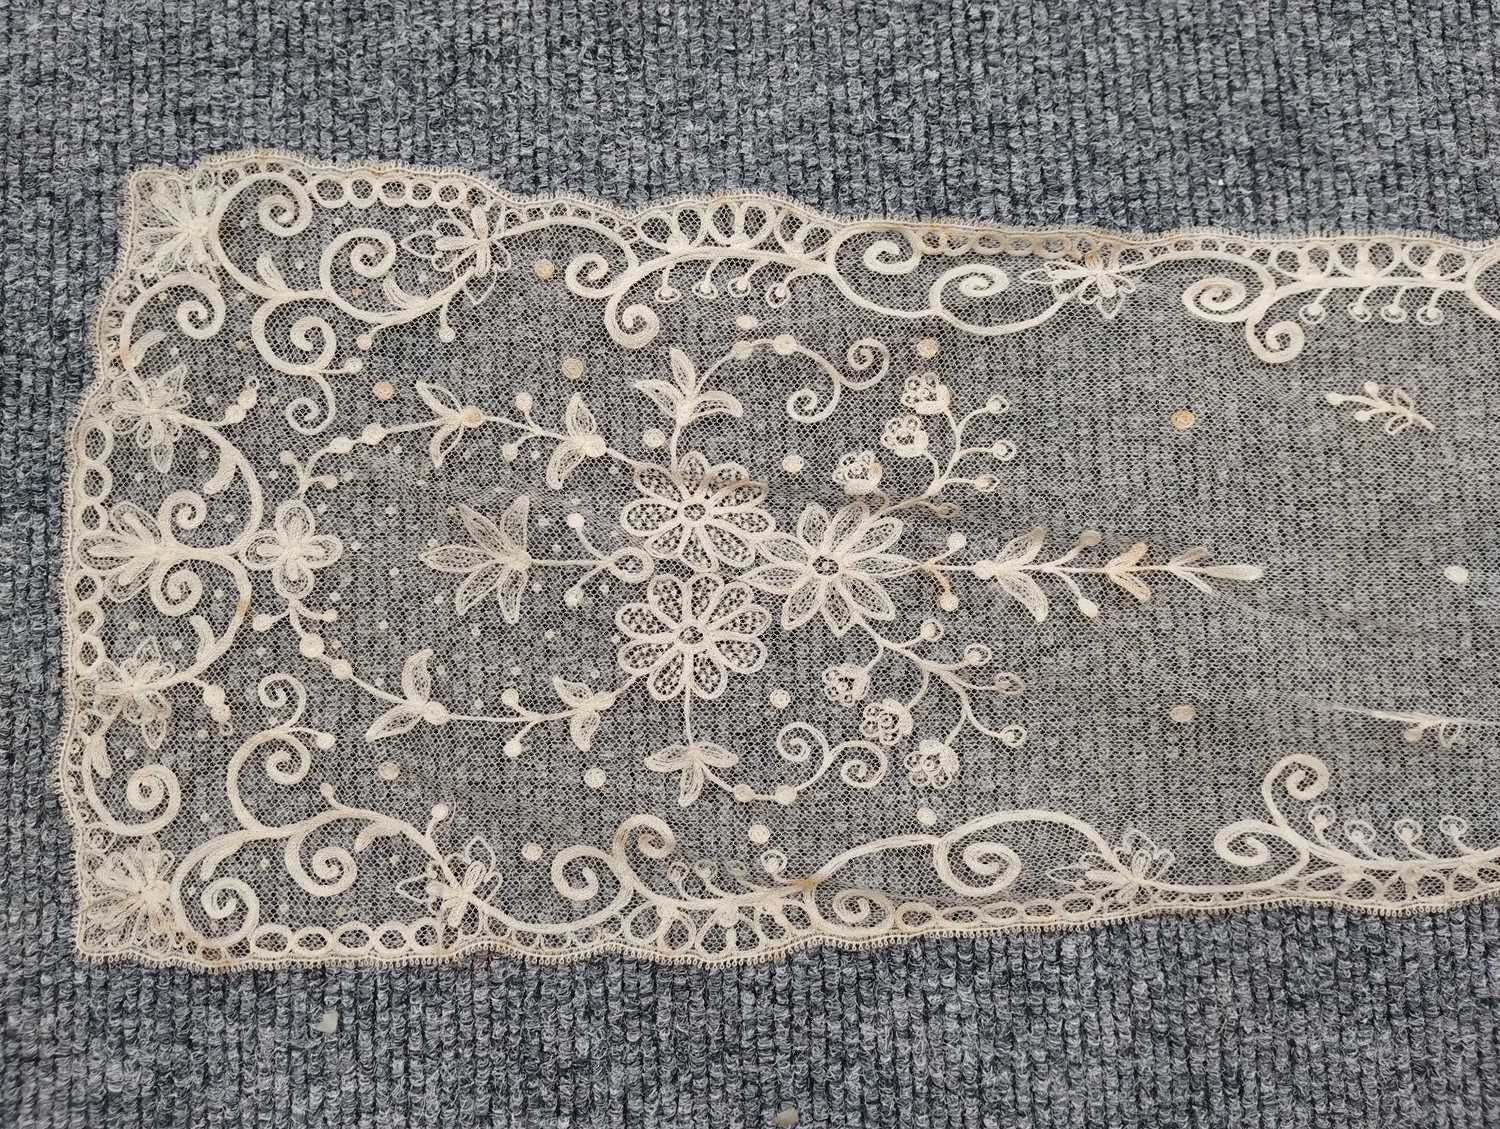 Early 20th Century Lace comprising a flounce with appliquéd flower heads and motifs within a - Image 18 of 32